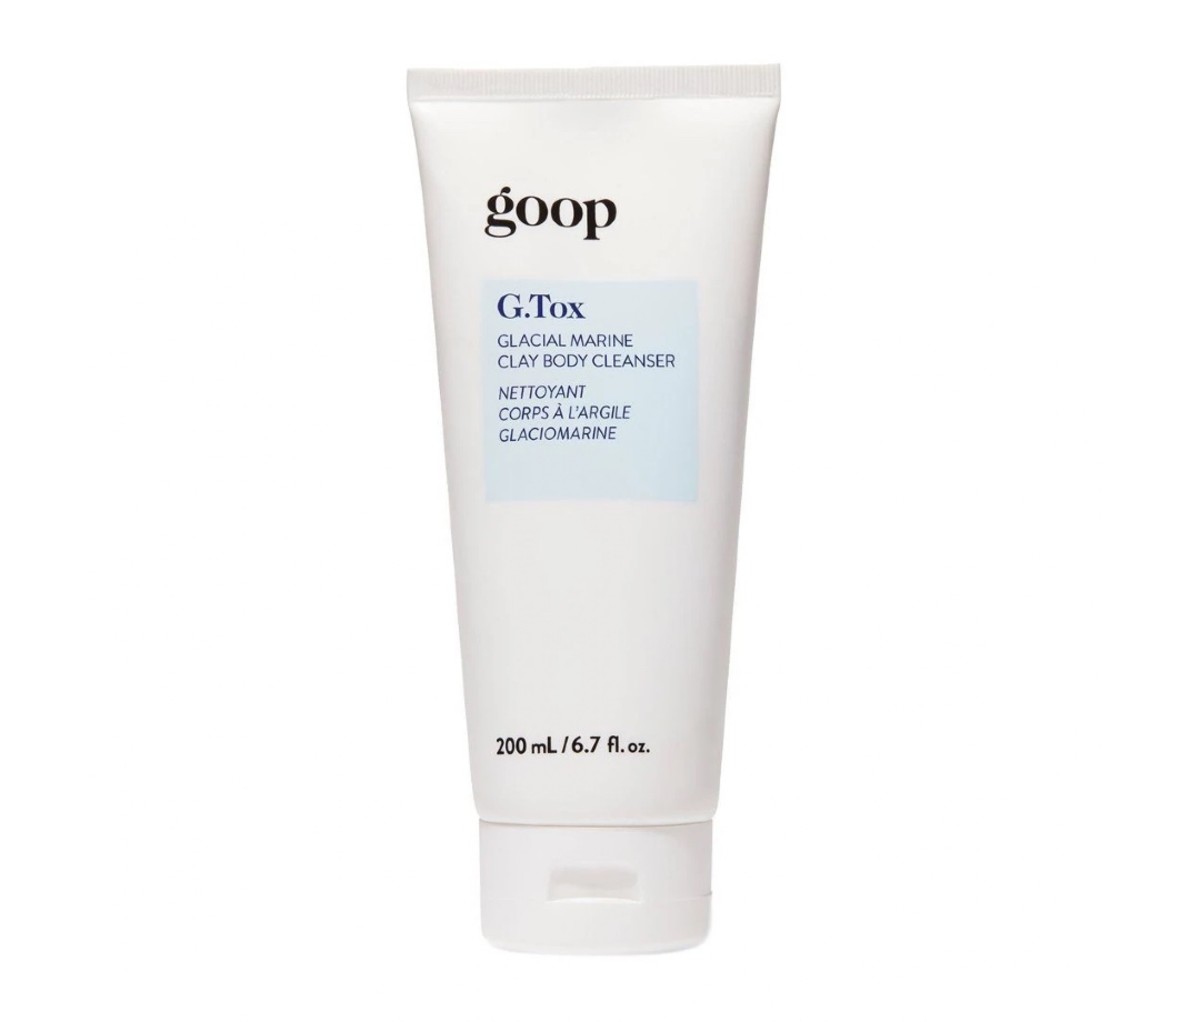 Glacial Marine Clay Body Cleaner by Goop G. Tox